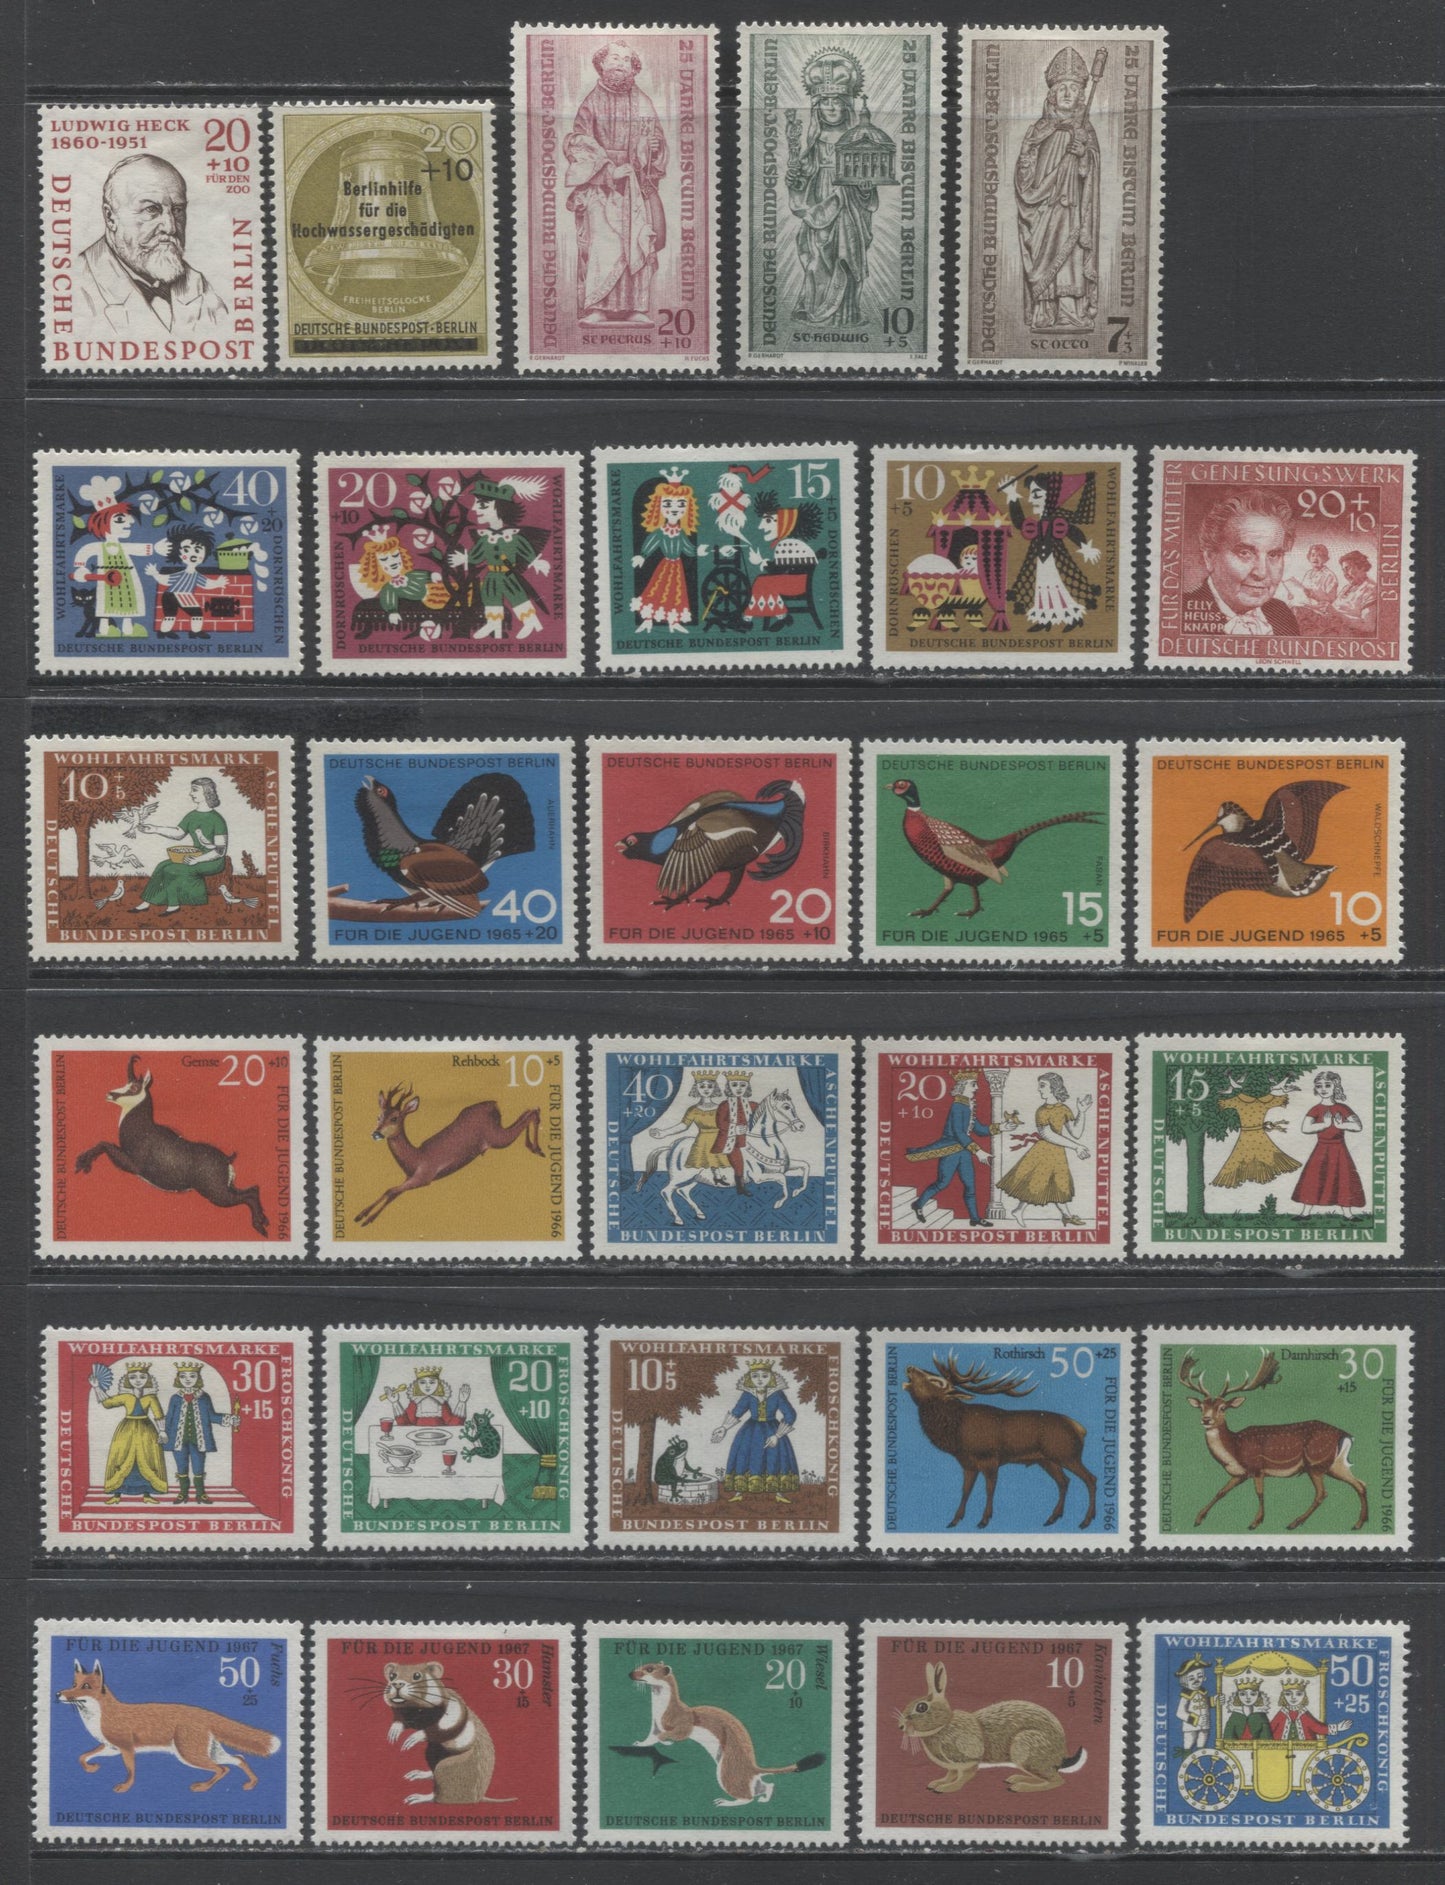 Lot 138 Germany - Berlin SC#9NB14/9NB56 1955-1968 Occupation Semi Postals, 38 F/VFOG Singles, Click on Listing to See ALL Pictures, 2017 Scott Cat. $21.5 USD